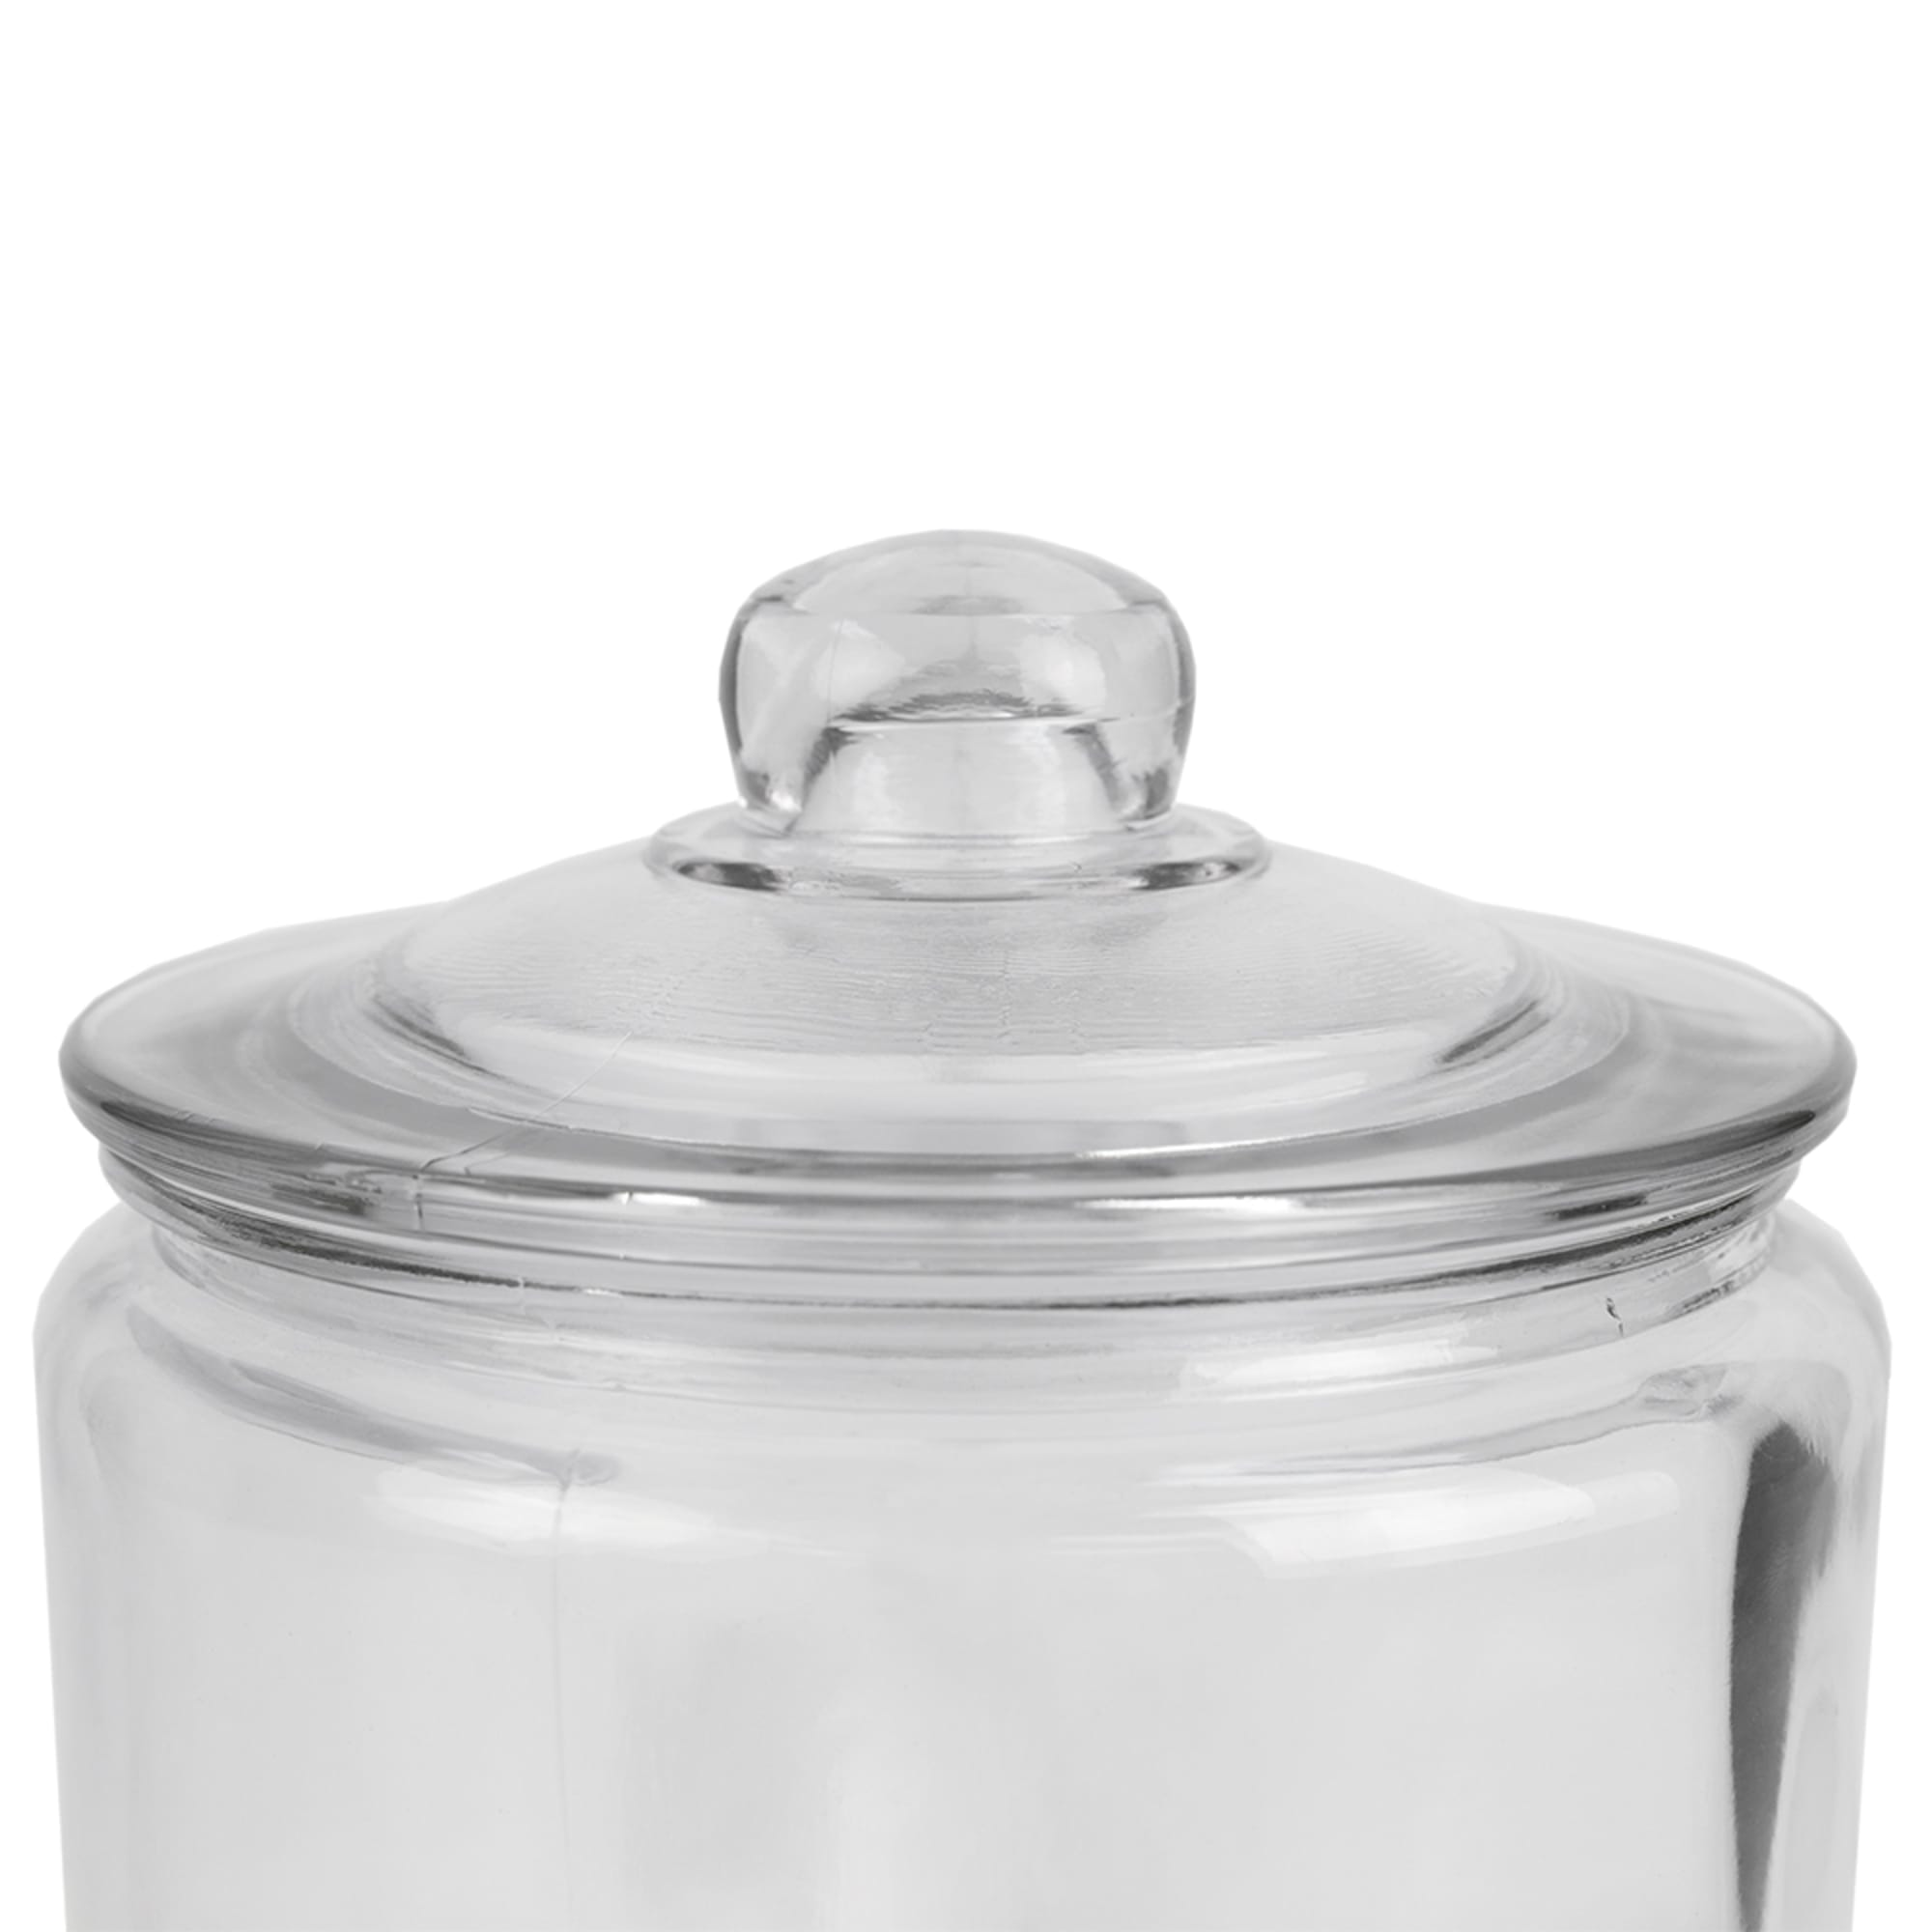 Home Basics Renaissance Collection Large 4 Lt Glass Jar with Easy Grab Knob Handles, Clear $10.00 EACH, CASE PACK OF 6